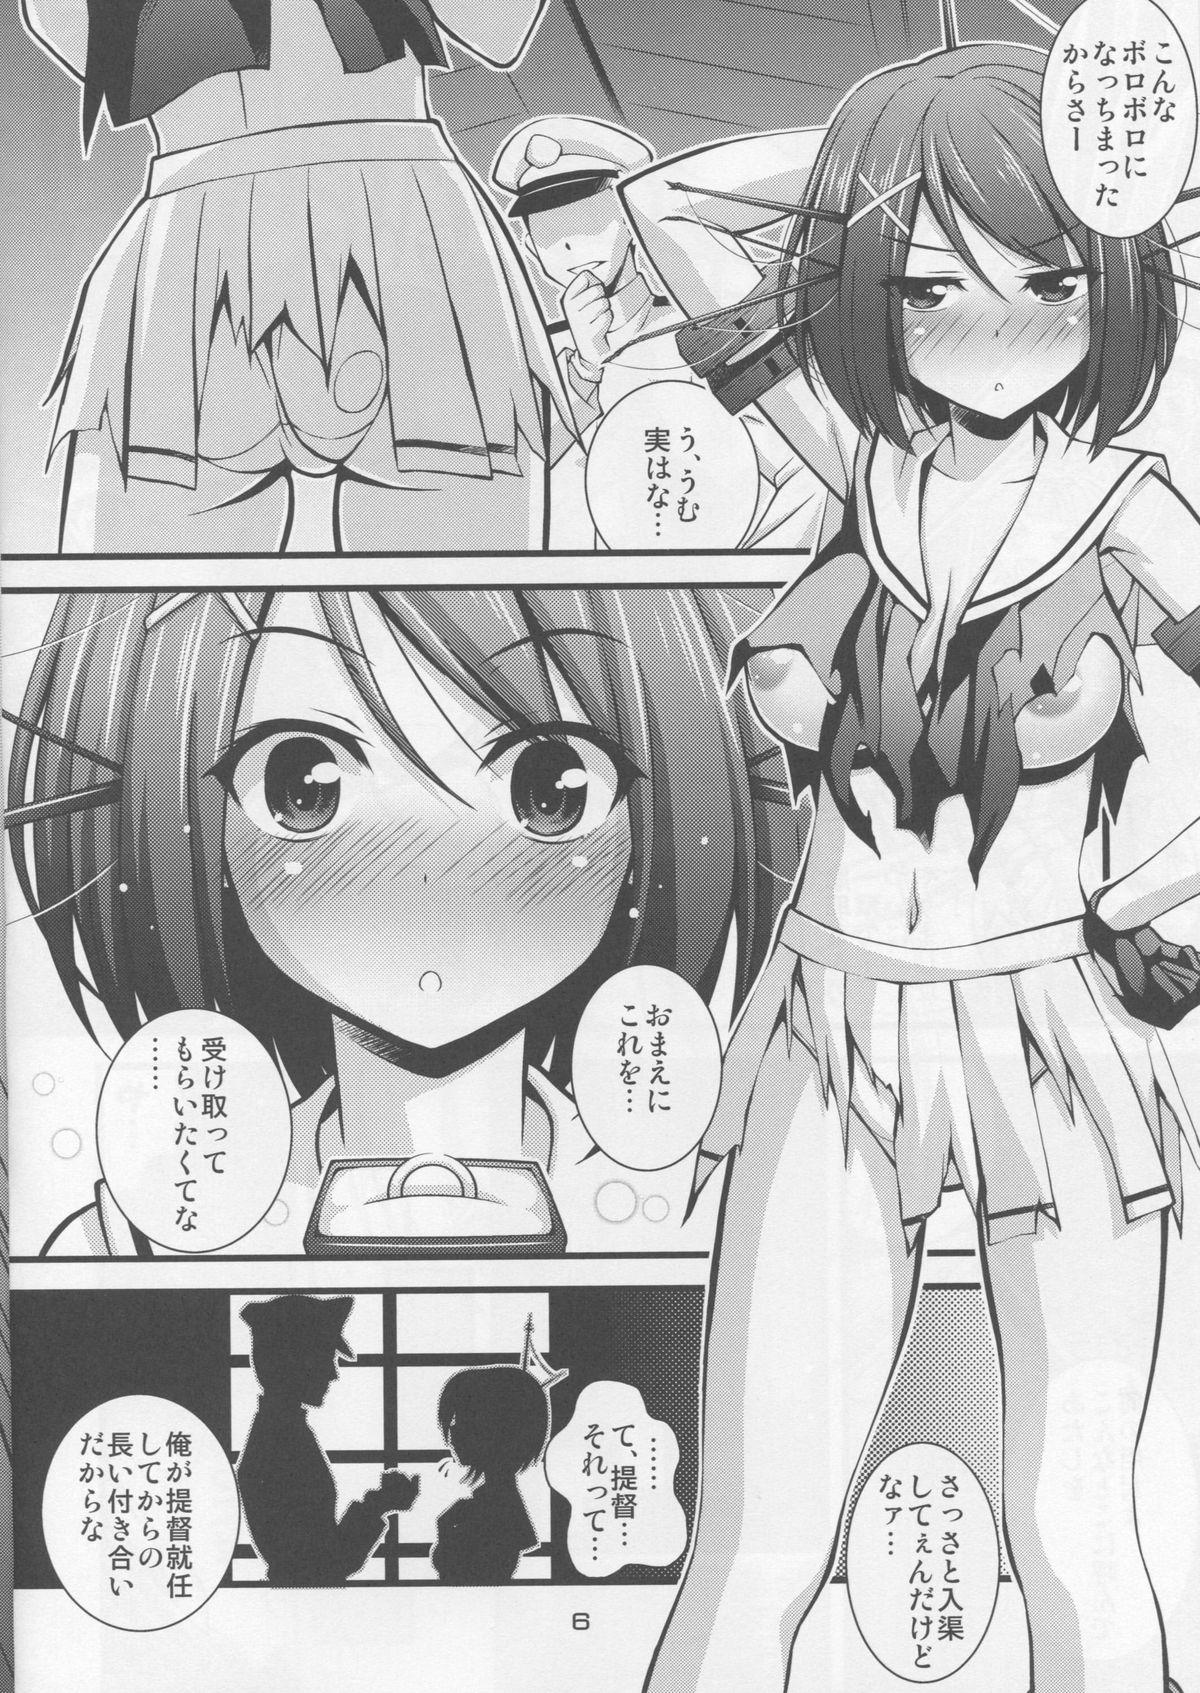 Audition Steel Mayonnaise 13 - Kantai collection Blow Jobs Porn - Page 5